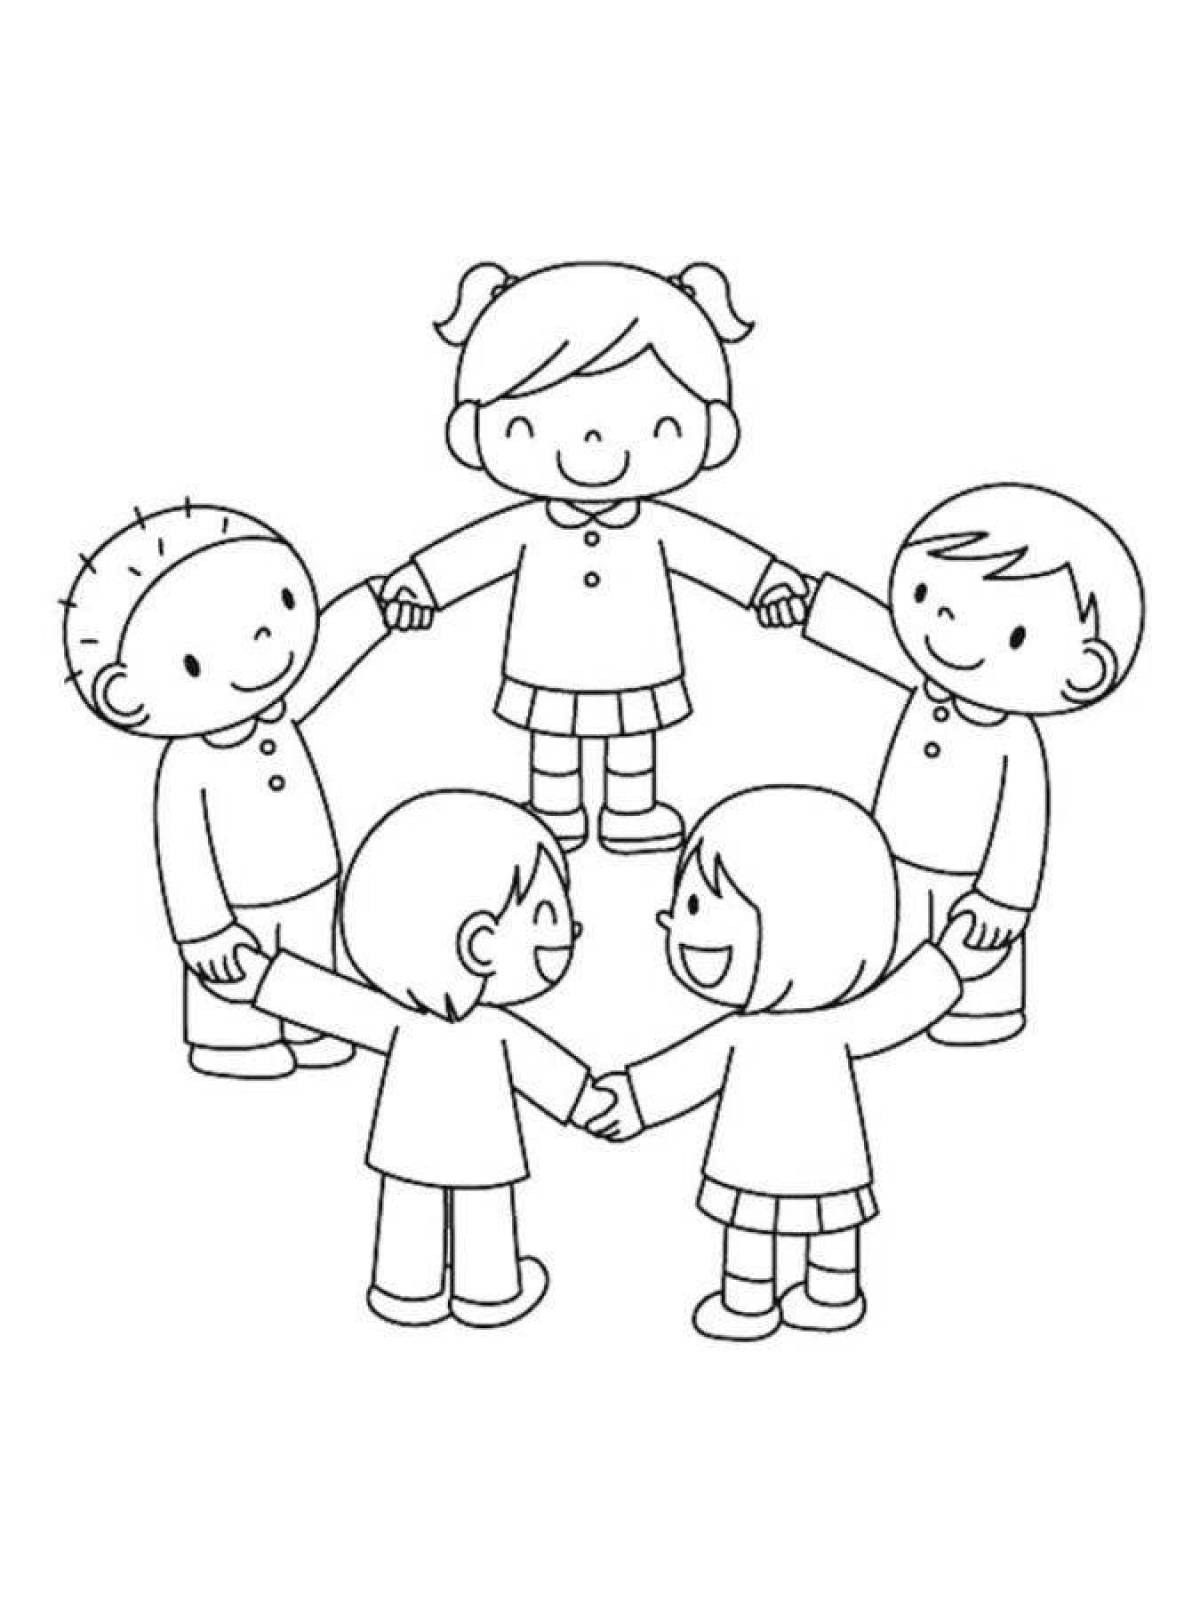 Playful me and my friends coloring page